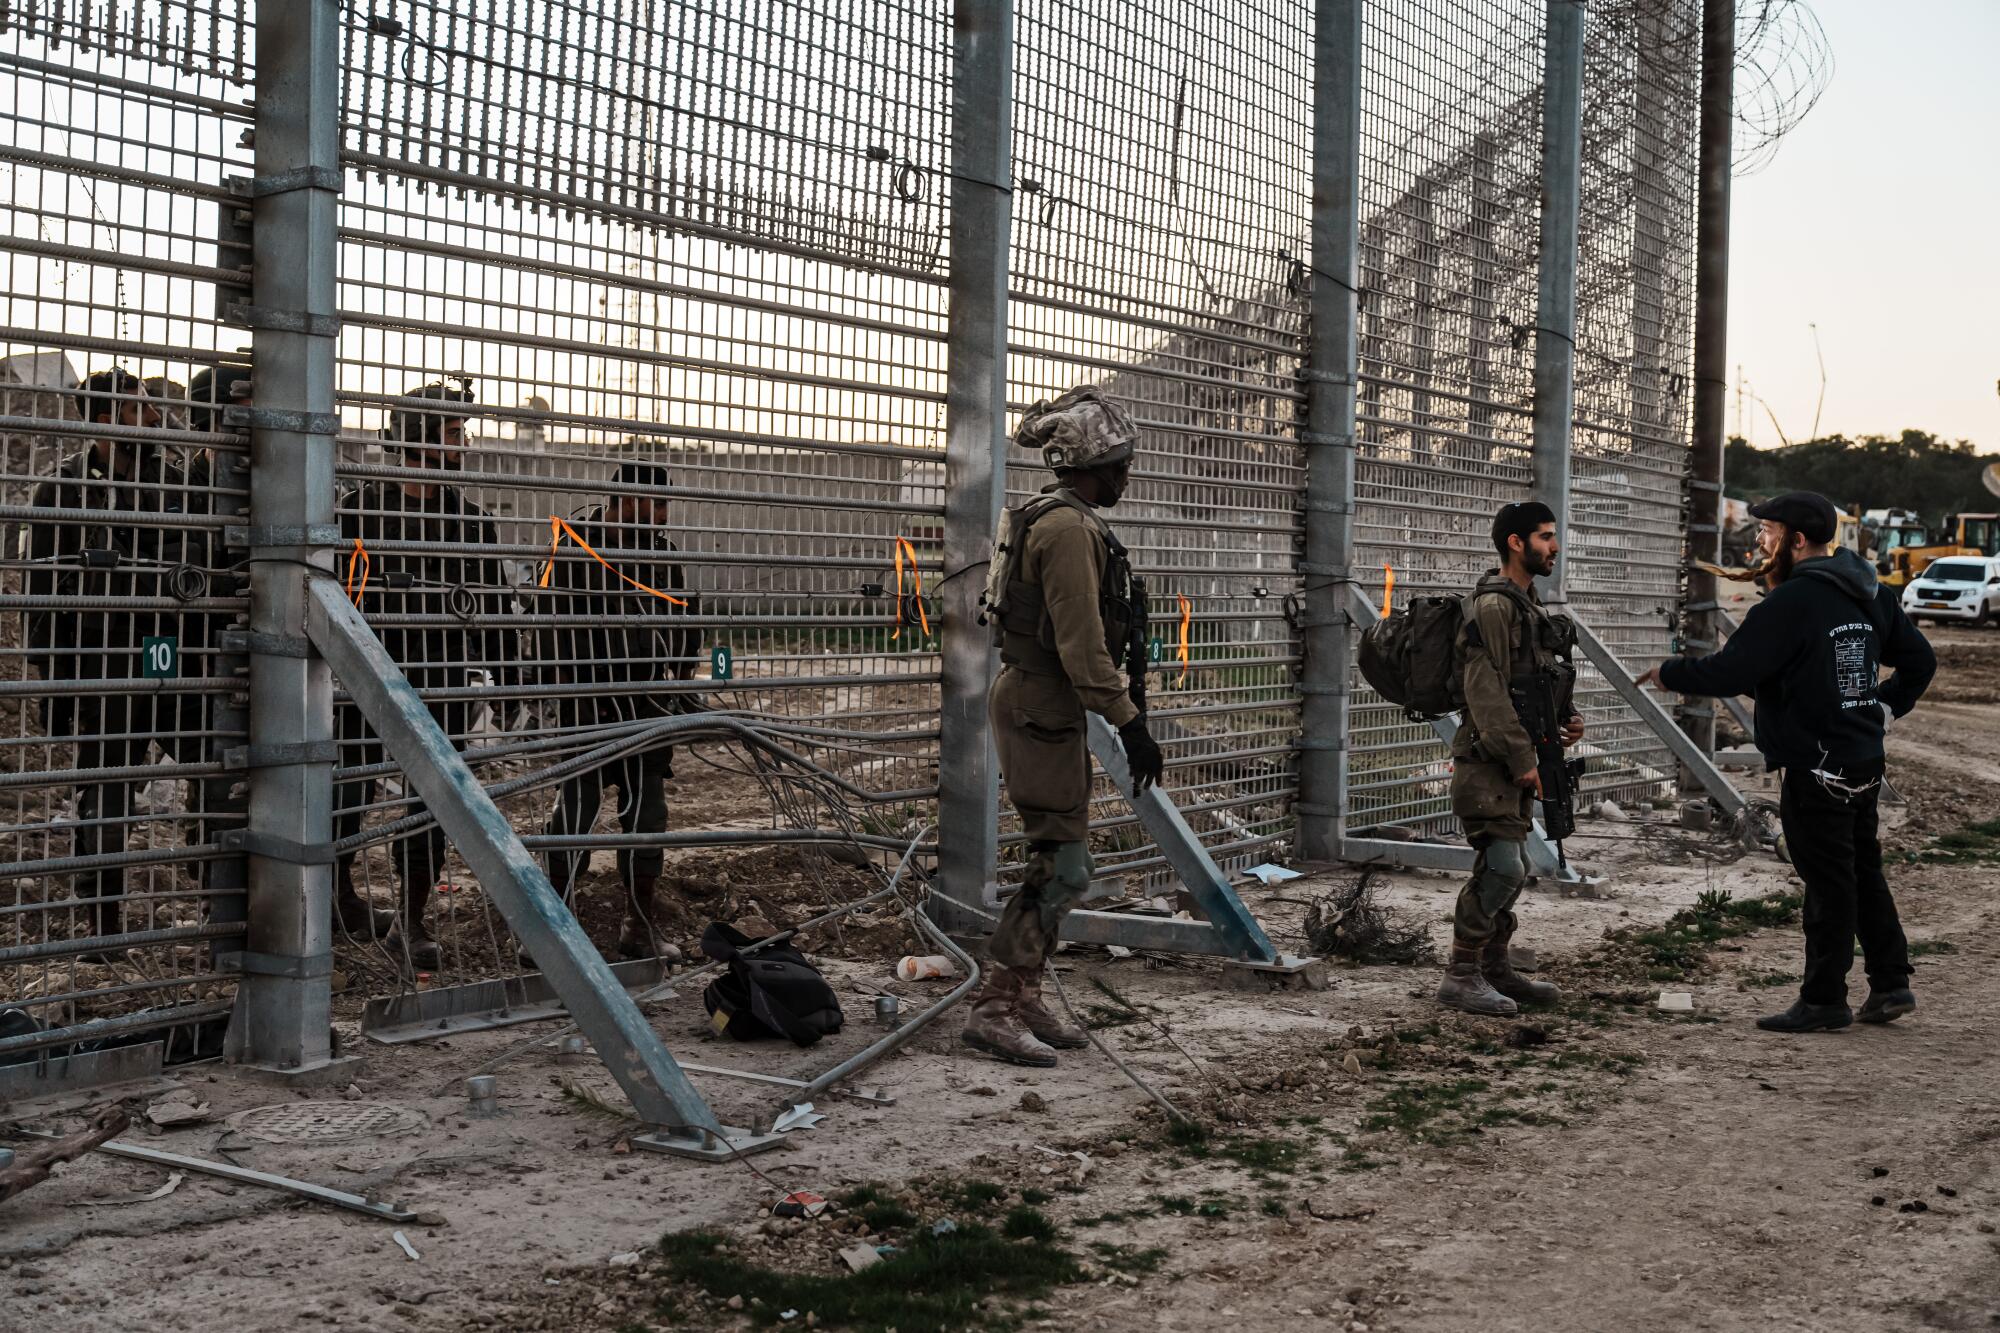 A soldier faces down one man as he approaches a tall security fence with troops on both sides